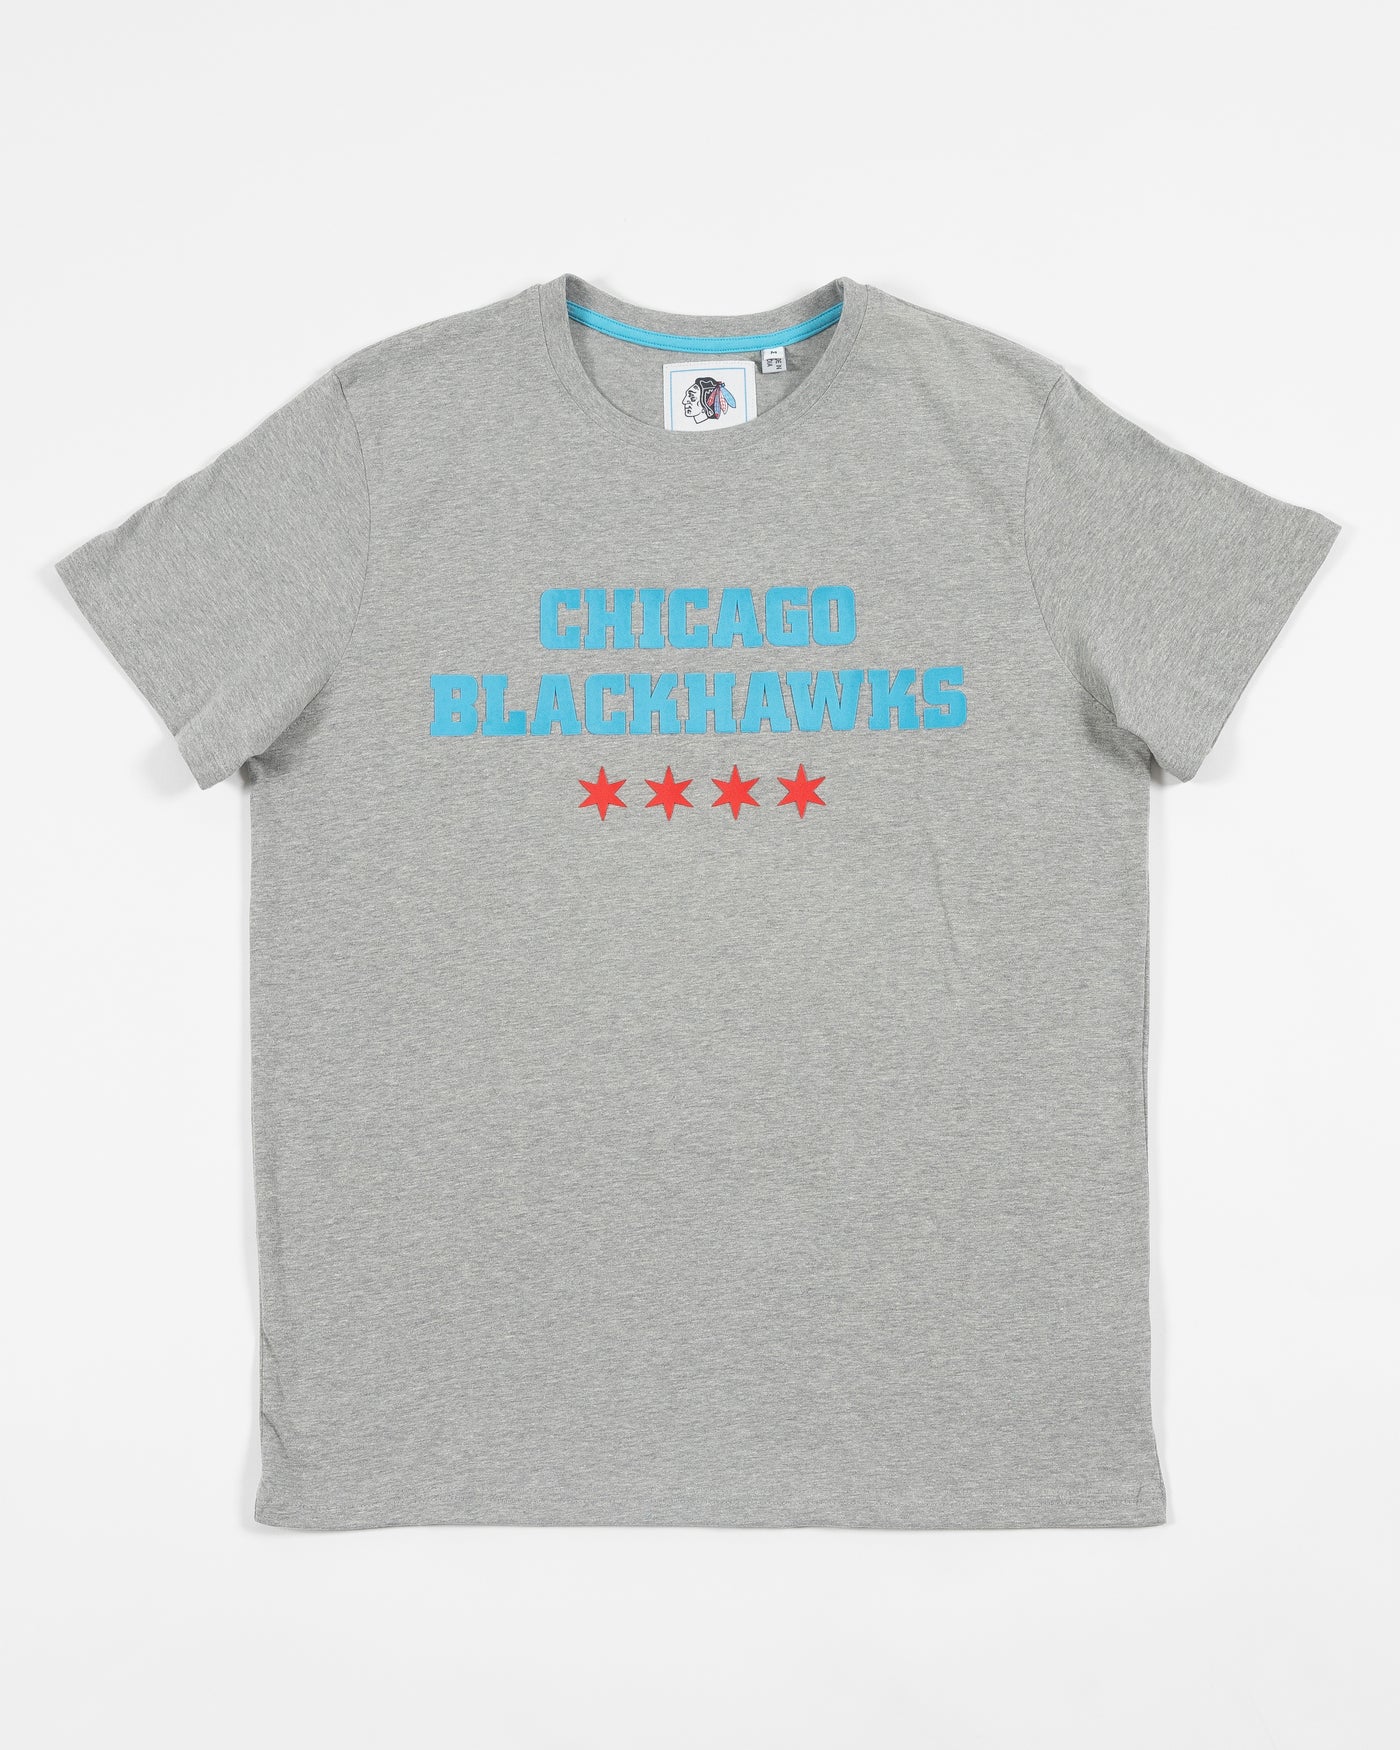 grey Sport Design Sweden short sleeve tee with raised Chicago Blackhawks word graphic above four Chicago stars - front lay flat